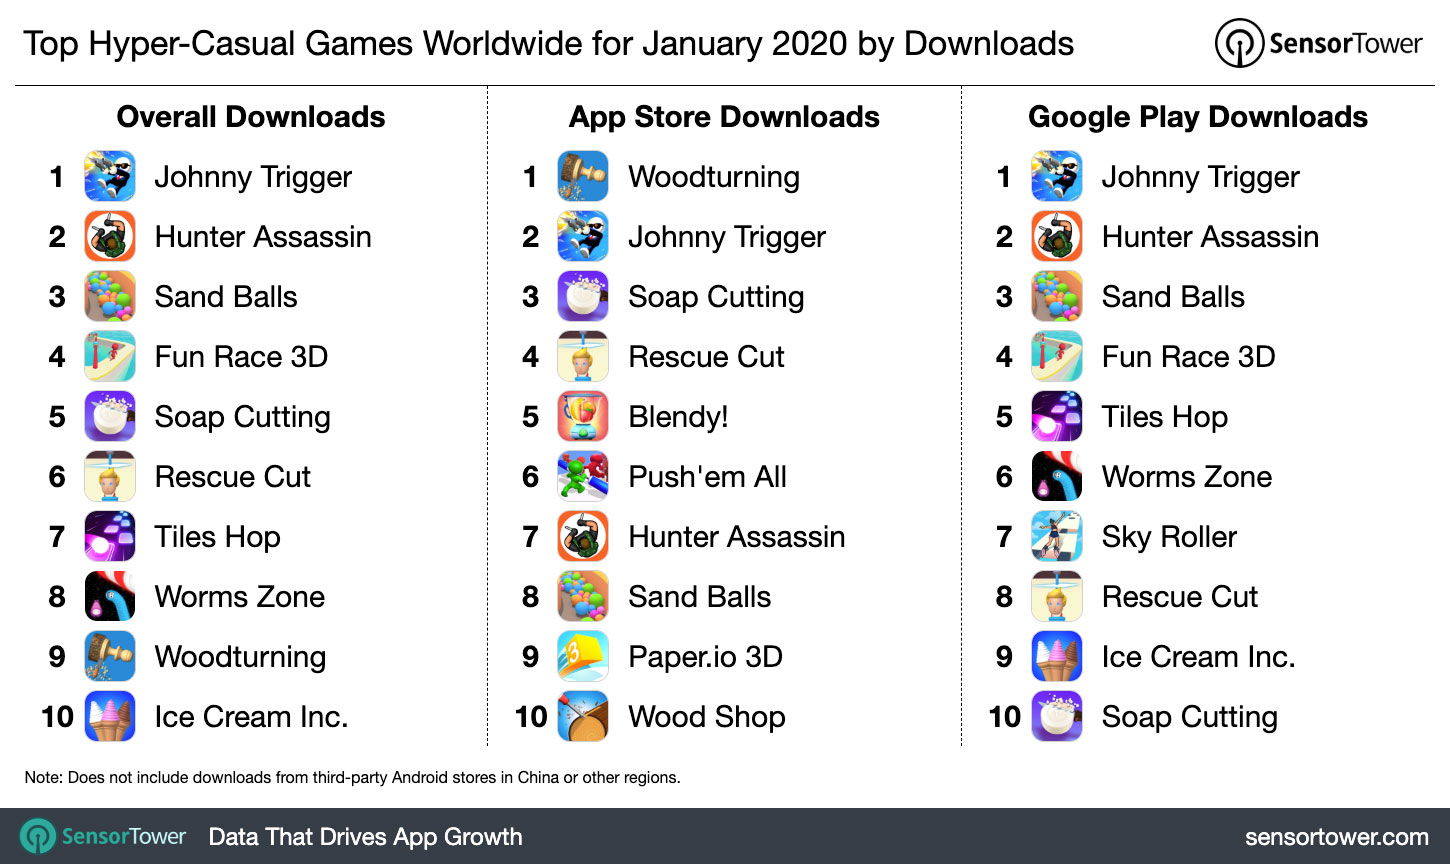 Top Hyper-Casual Games Worldwide for January 2020 by Downloads